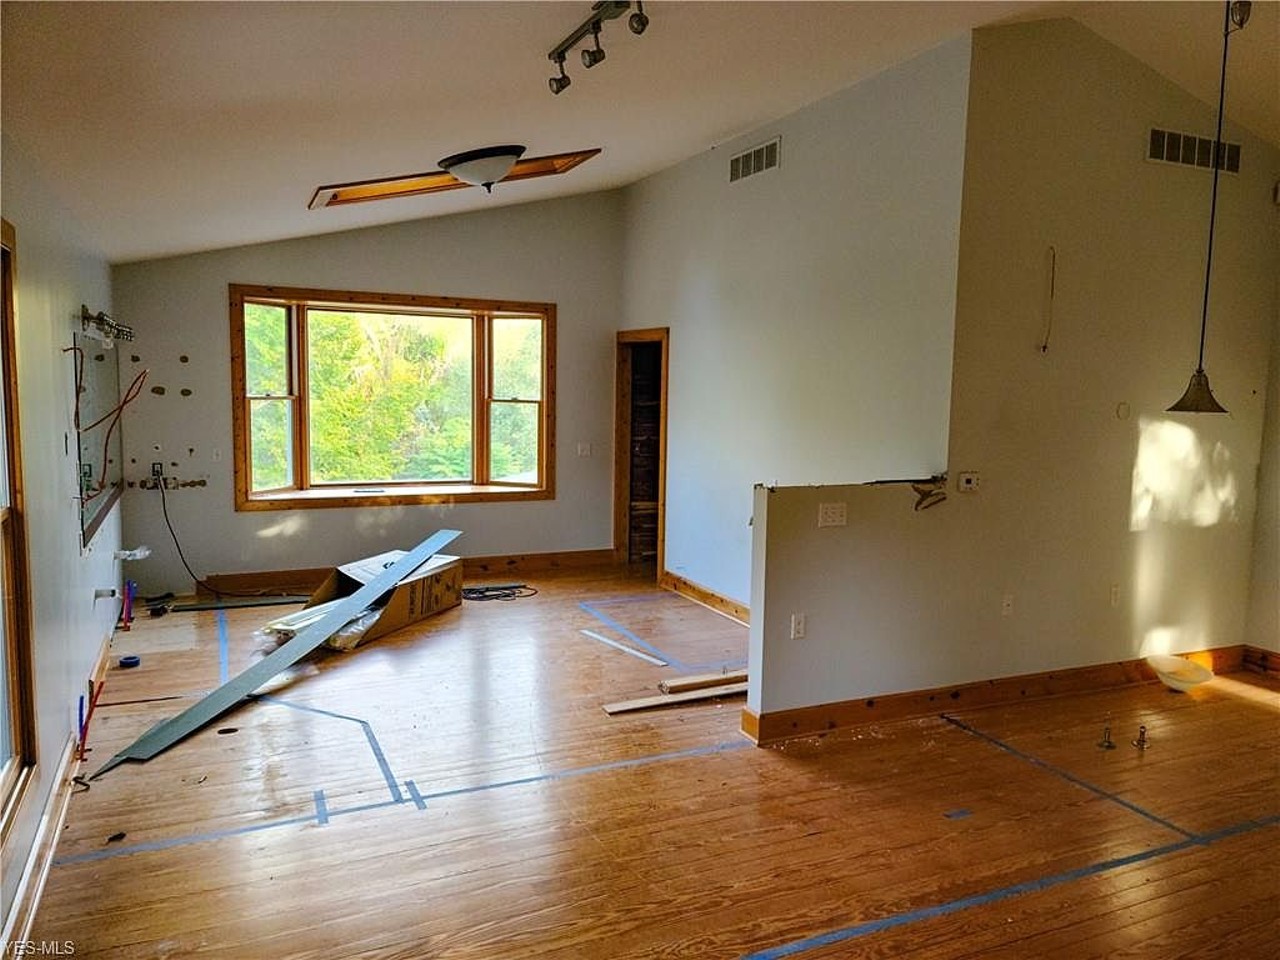 Who Wants to Pay $850,000 to Finish A Partially Renovated Home in Chagrin Falls?